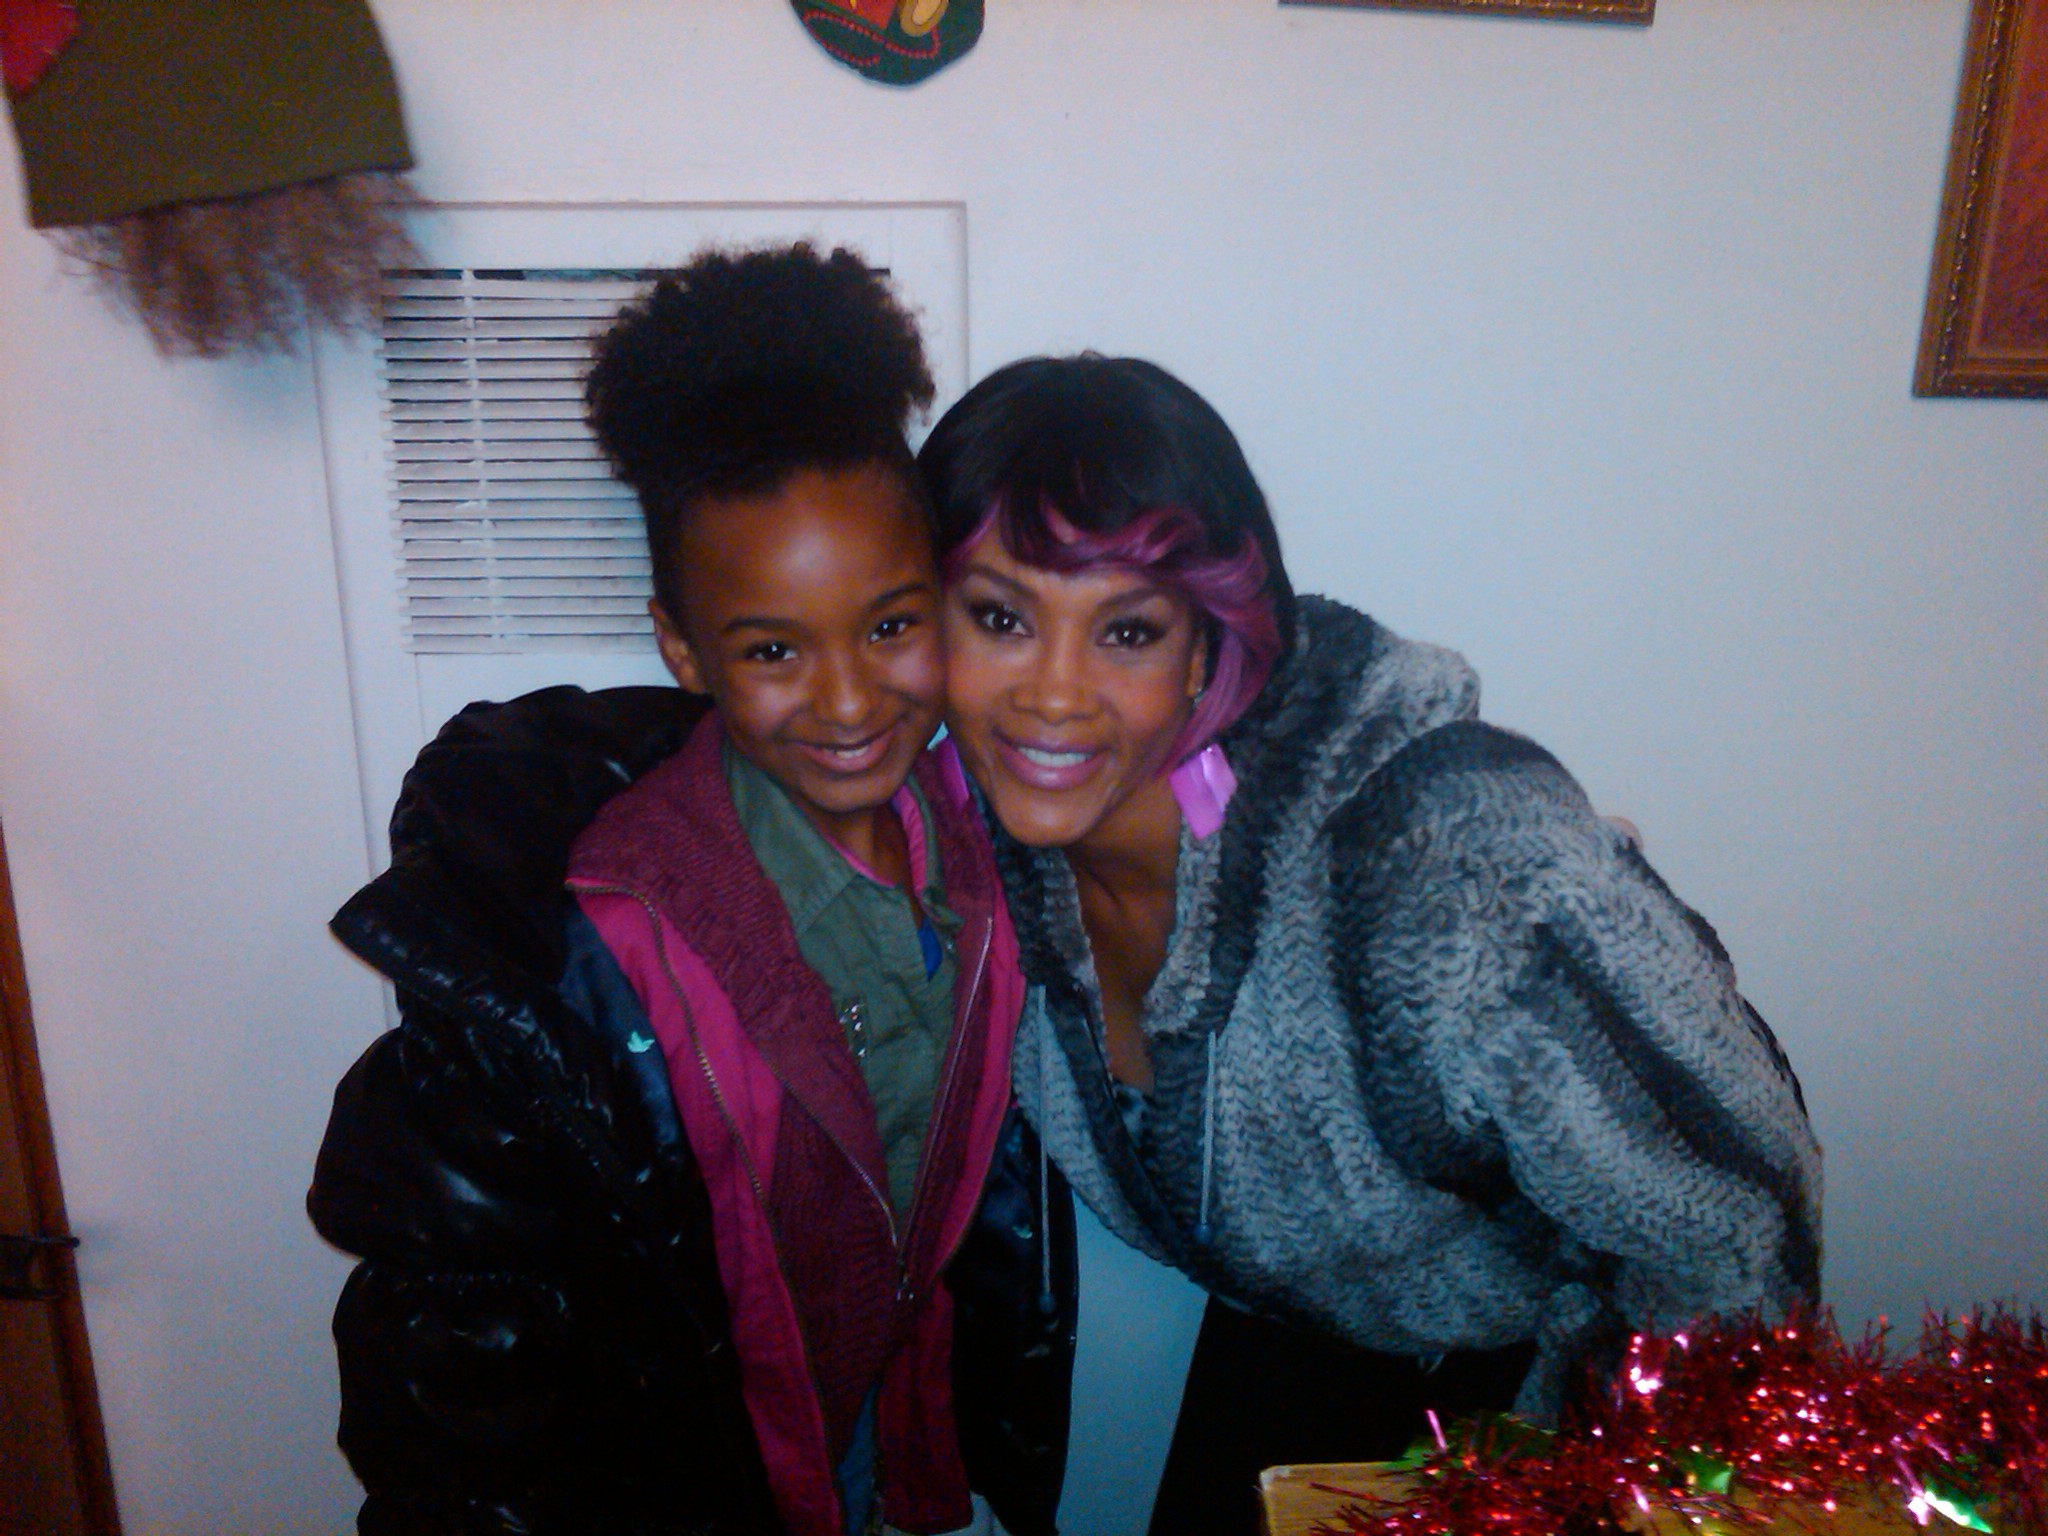 Nay Nay and Ms. Vivica Fox on the set of Annie Claus